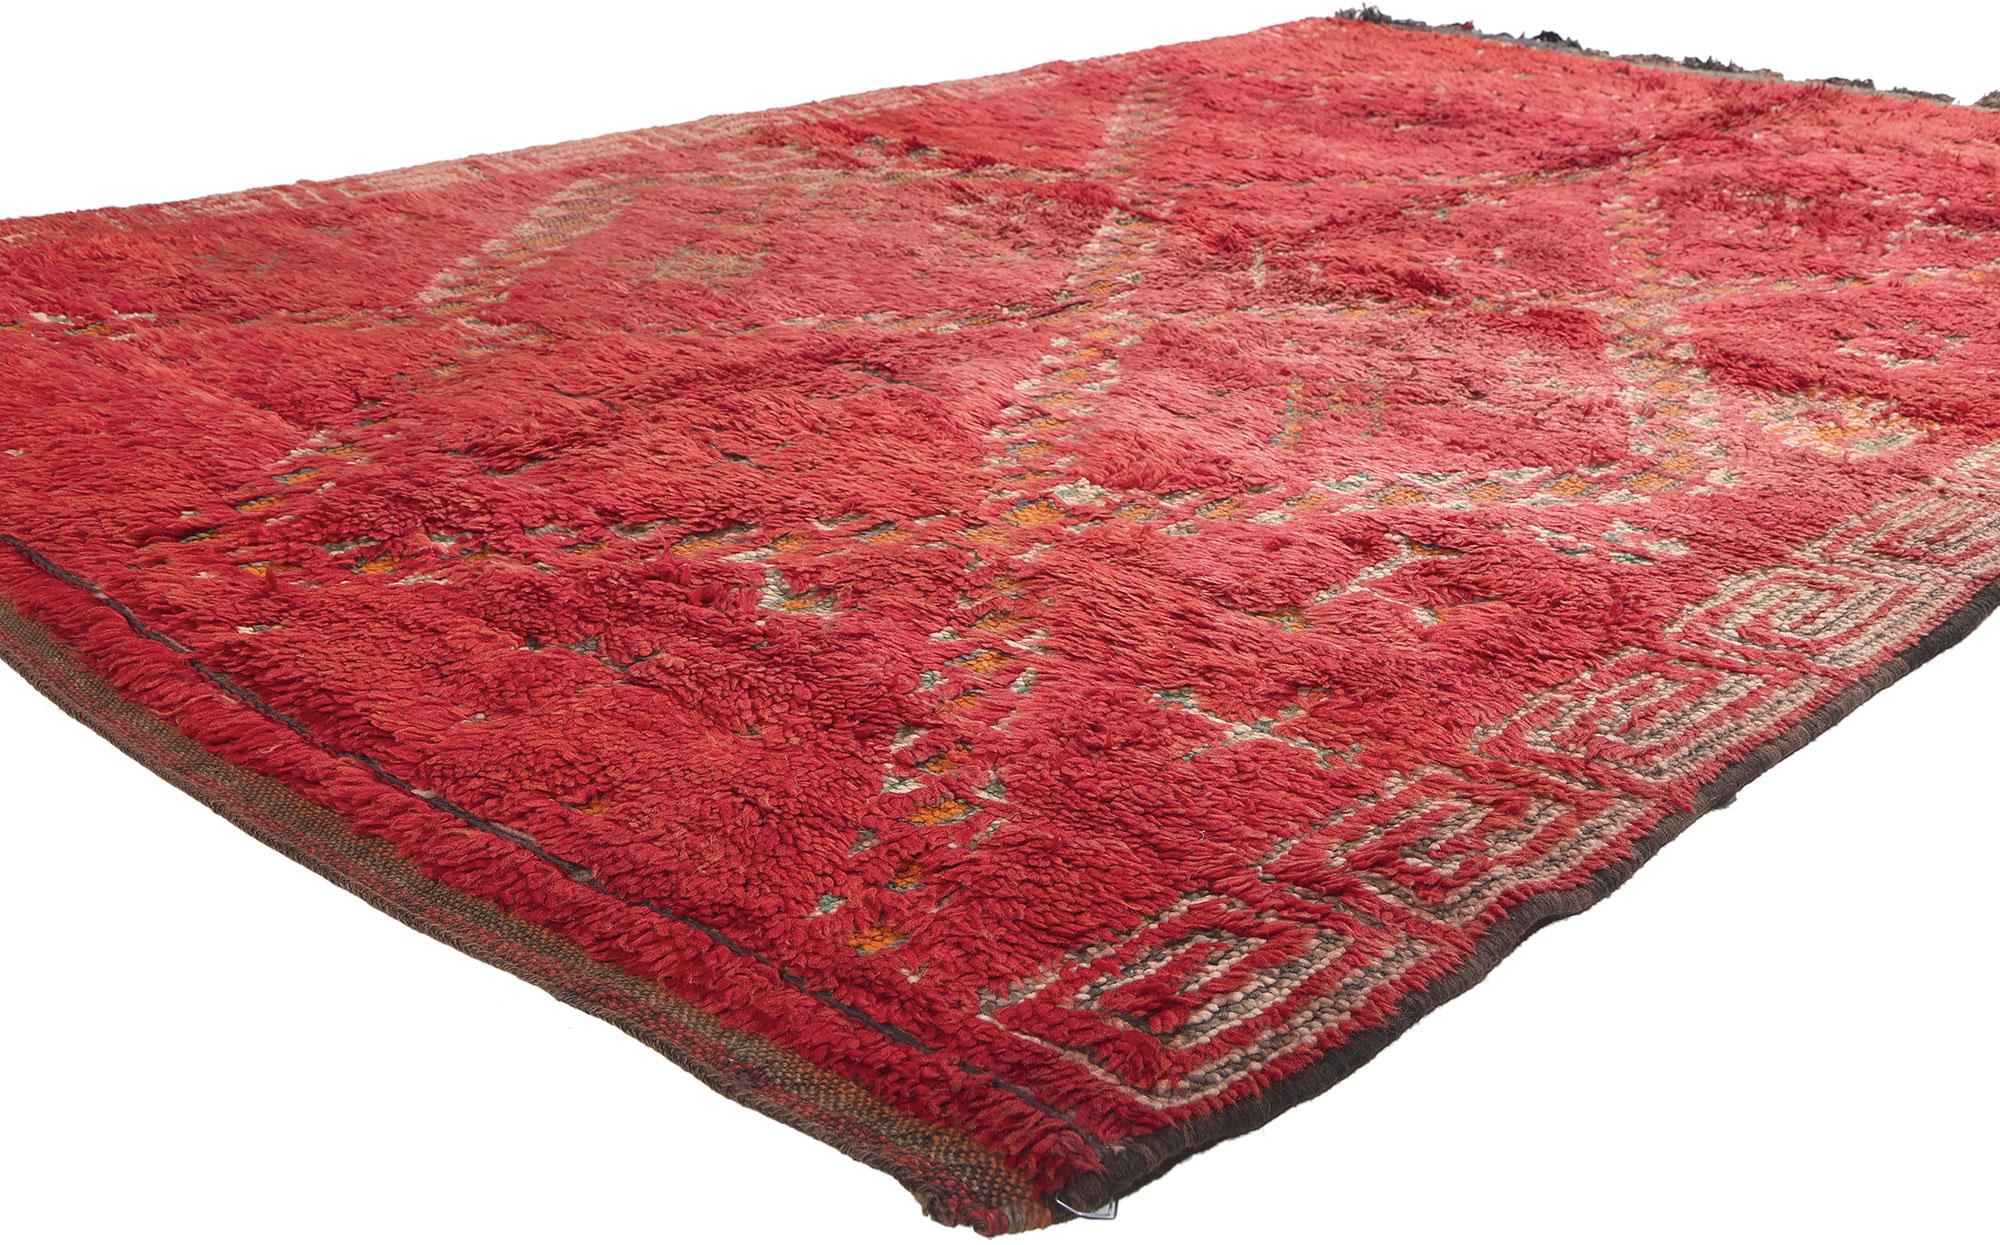 20153 Vintage Red Beni MGuild Moroccan Rug, 05'09 x 08'04. In this hand-knotted wool vintage Beni MGuild Moroccan rug, embrace the fusion of bold bohemian aesthetics and Midcentury Modern style. The intricate diamond design and vibrant colors woven